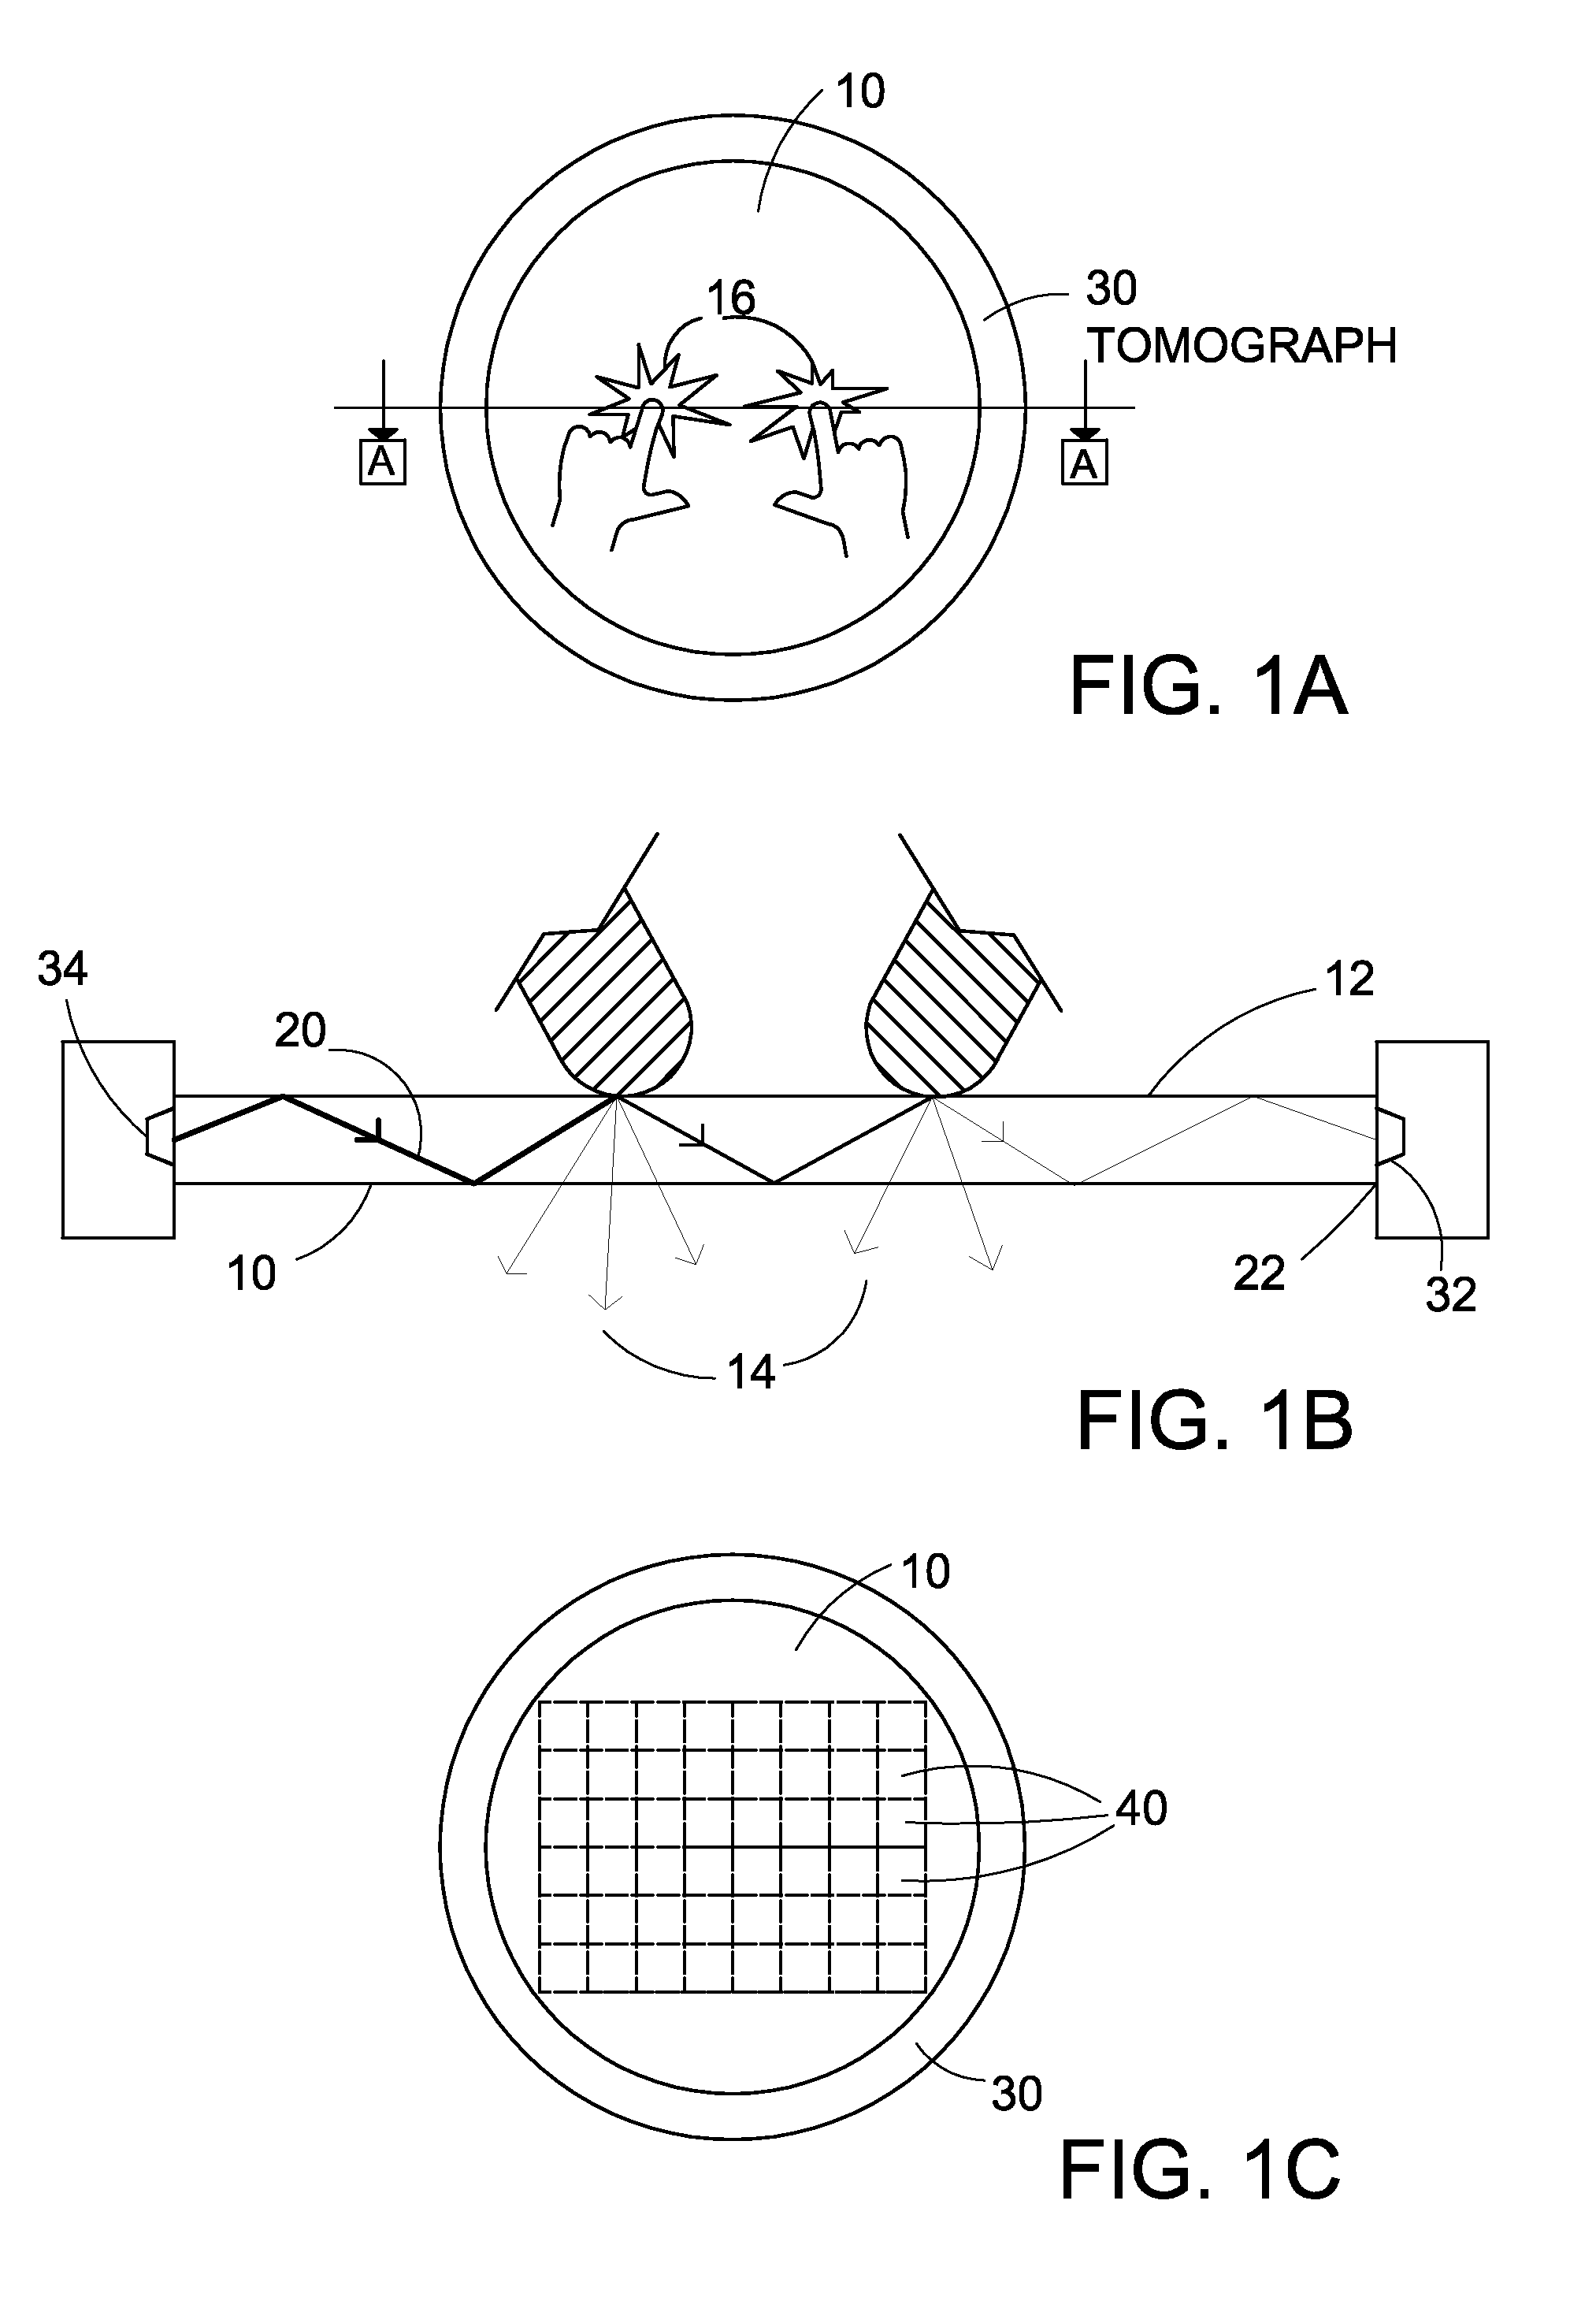 Method and apparatus for tomographic touch imaging and interactive system using same